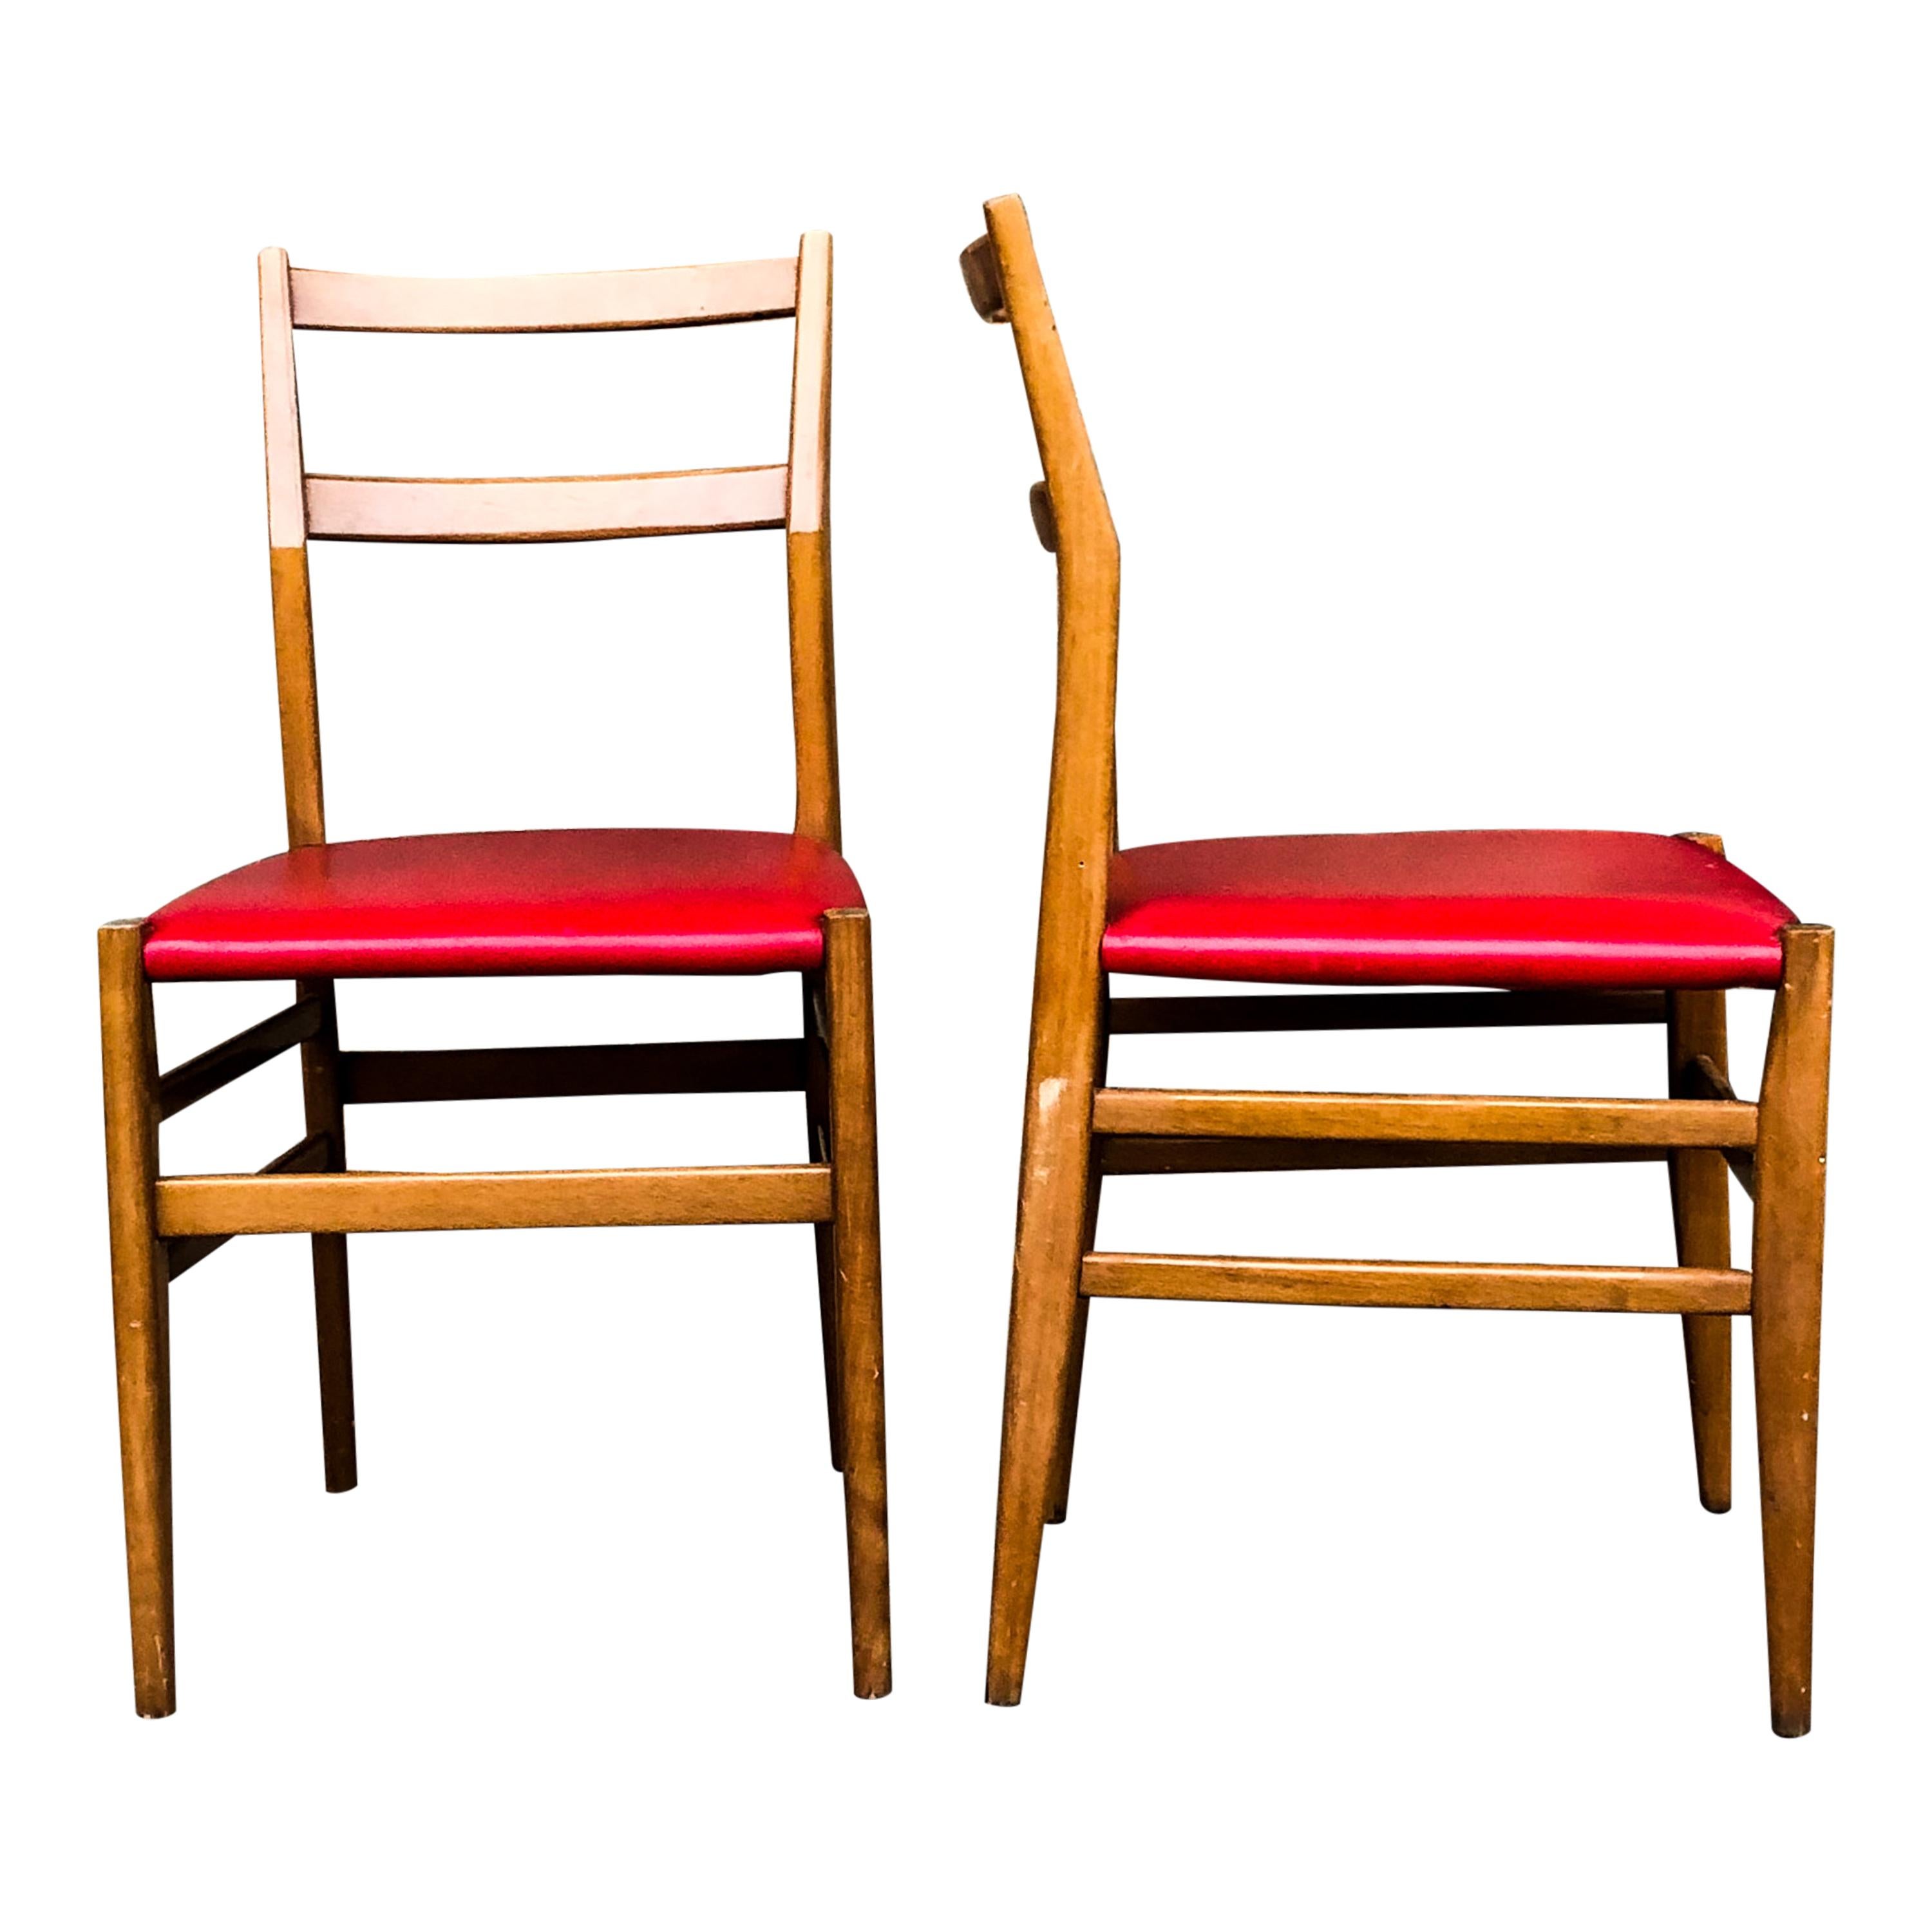 Red Faux Leather Leggera Dining Chairs by Gio Ponti for Cassina, 1960s, Set of 6 For Sale 5